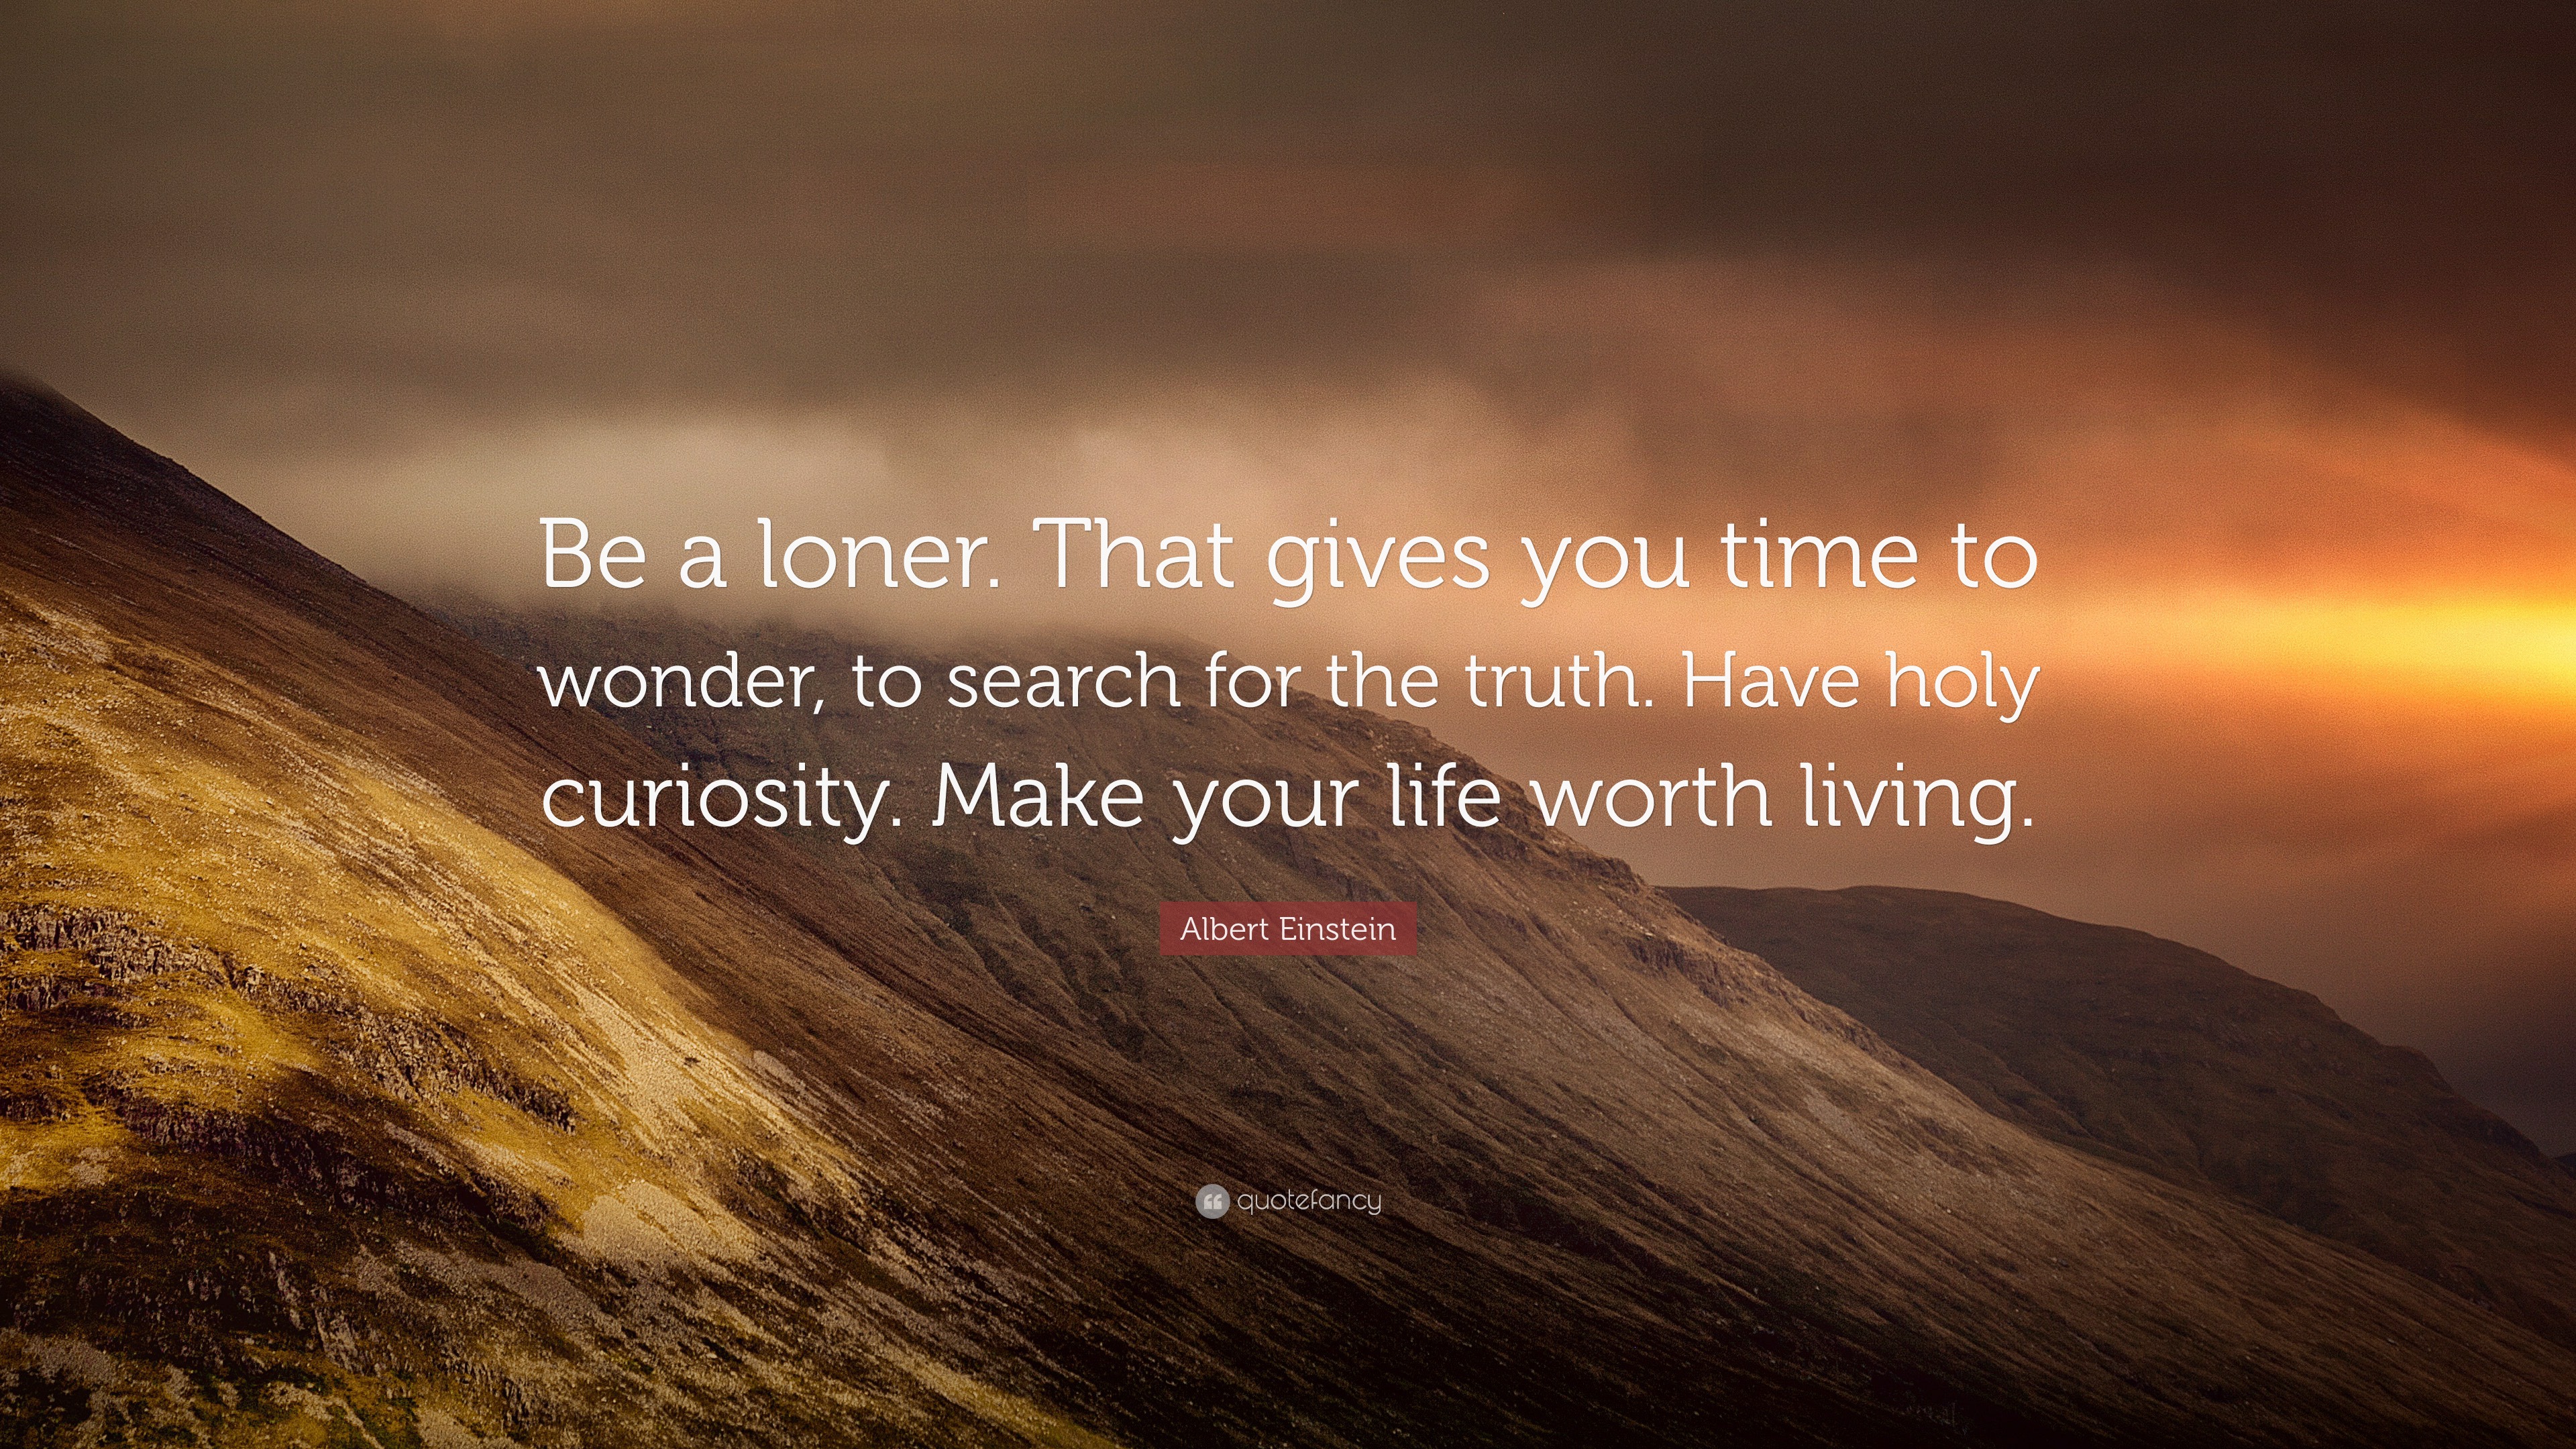 a life worth living quote albert einstein quote u201cbe a loner that gives you time to wonder